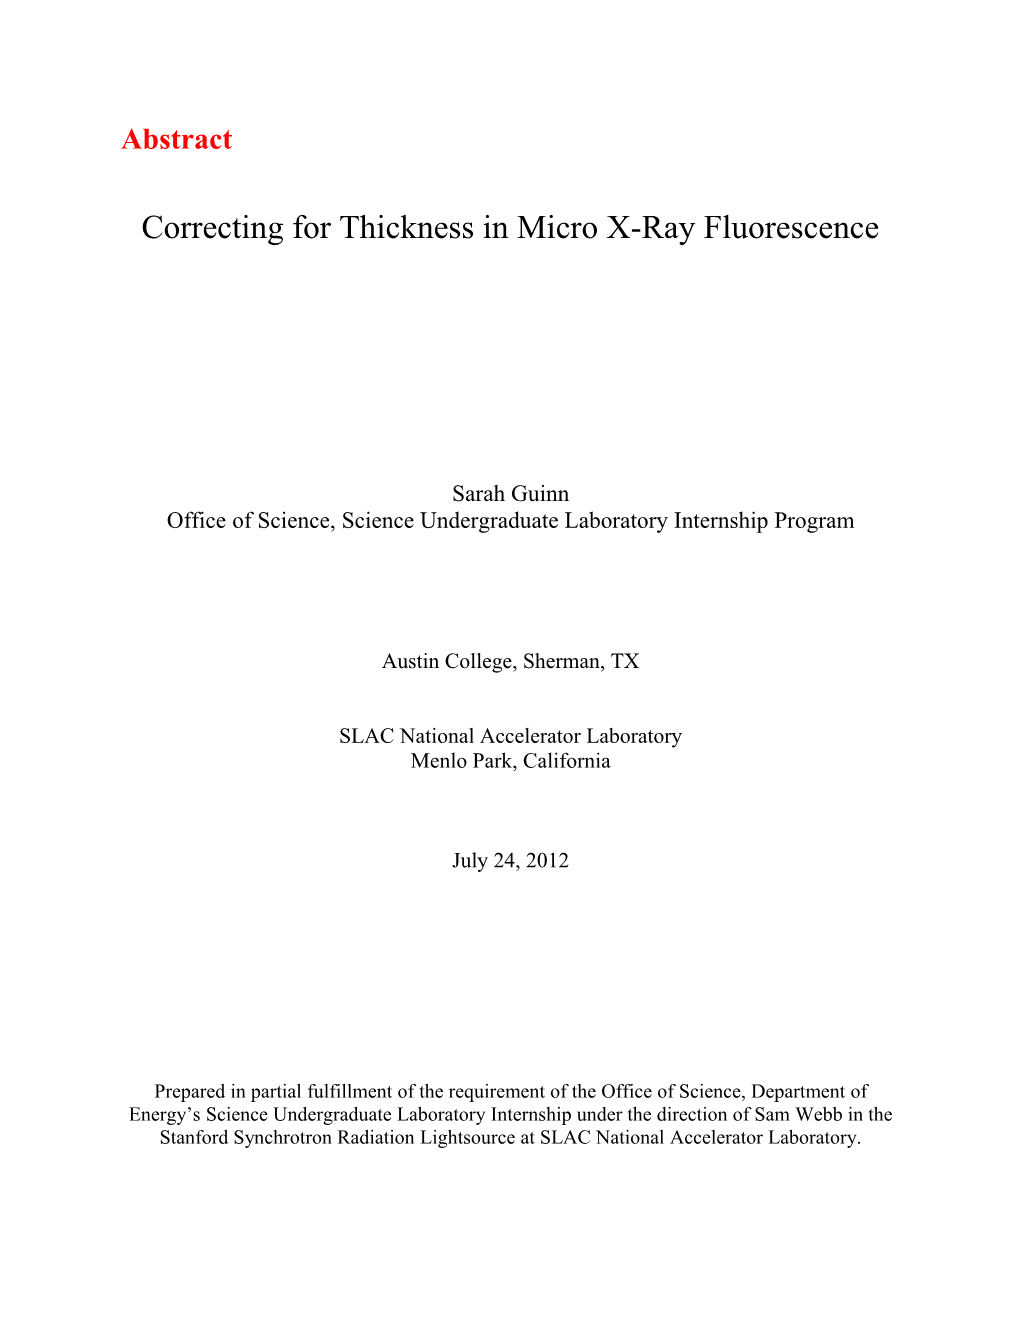 Correcting for Thickness in Micro X-Ray Fluorescence